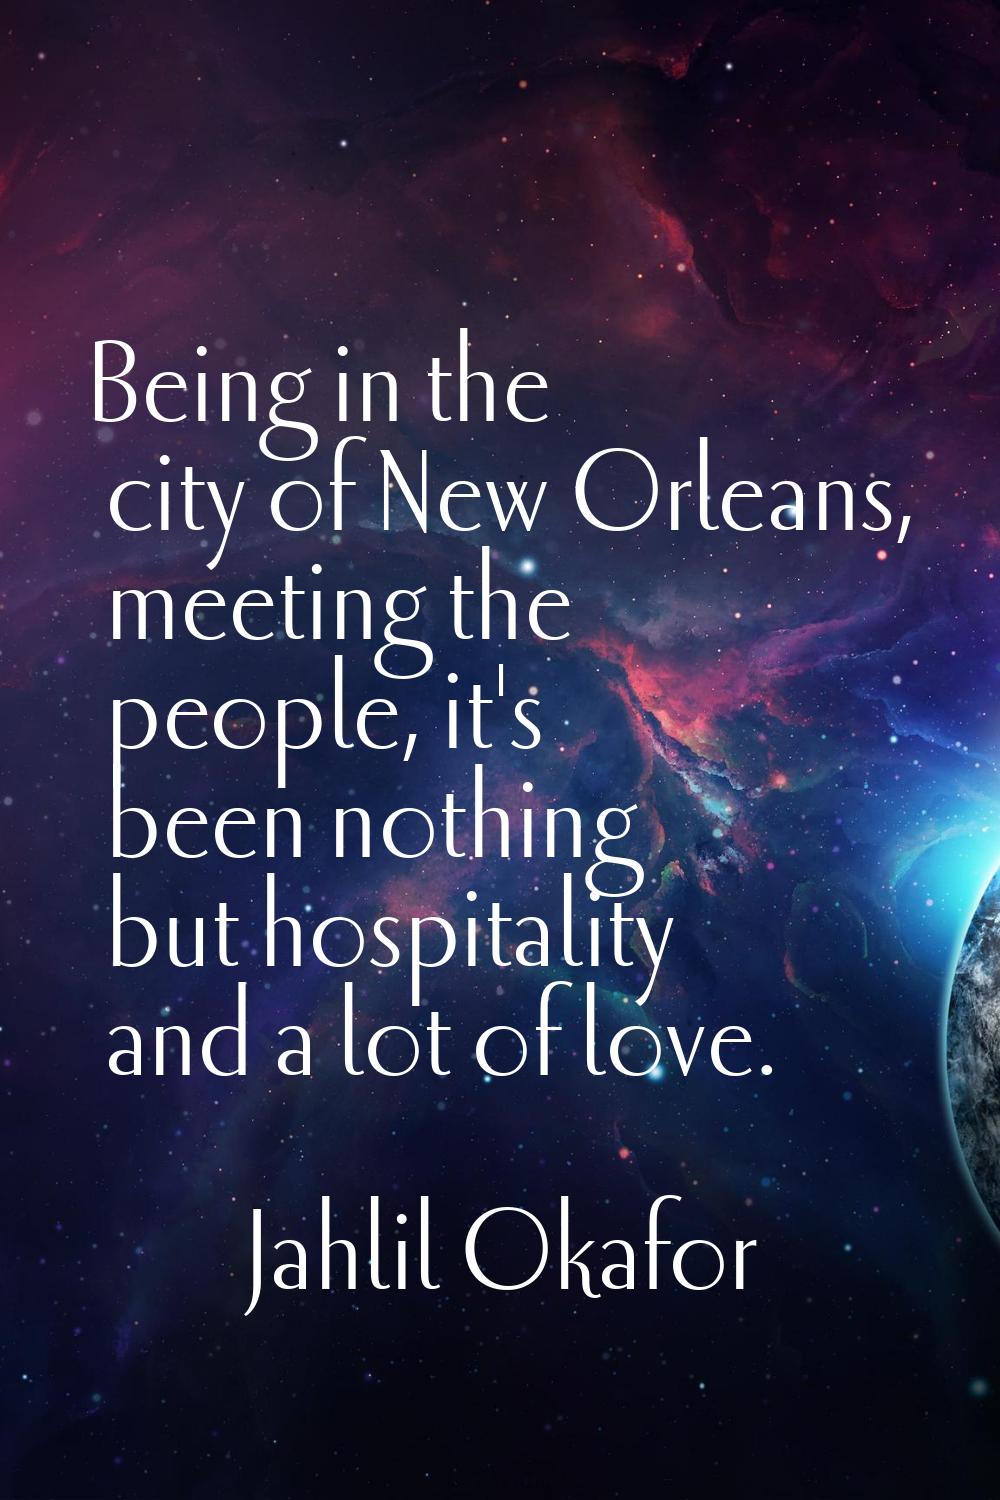 Being in the city of New Orleans, meeting the people, it's been nothing but hospitality and a lot o